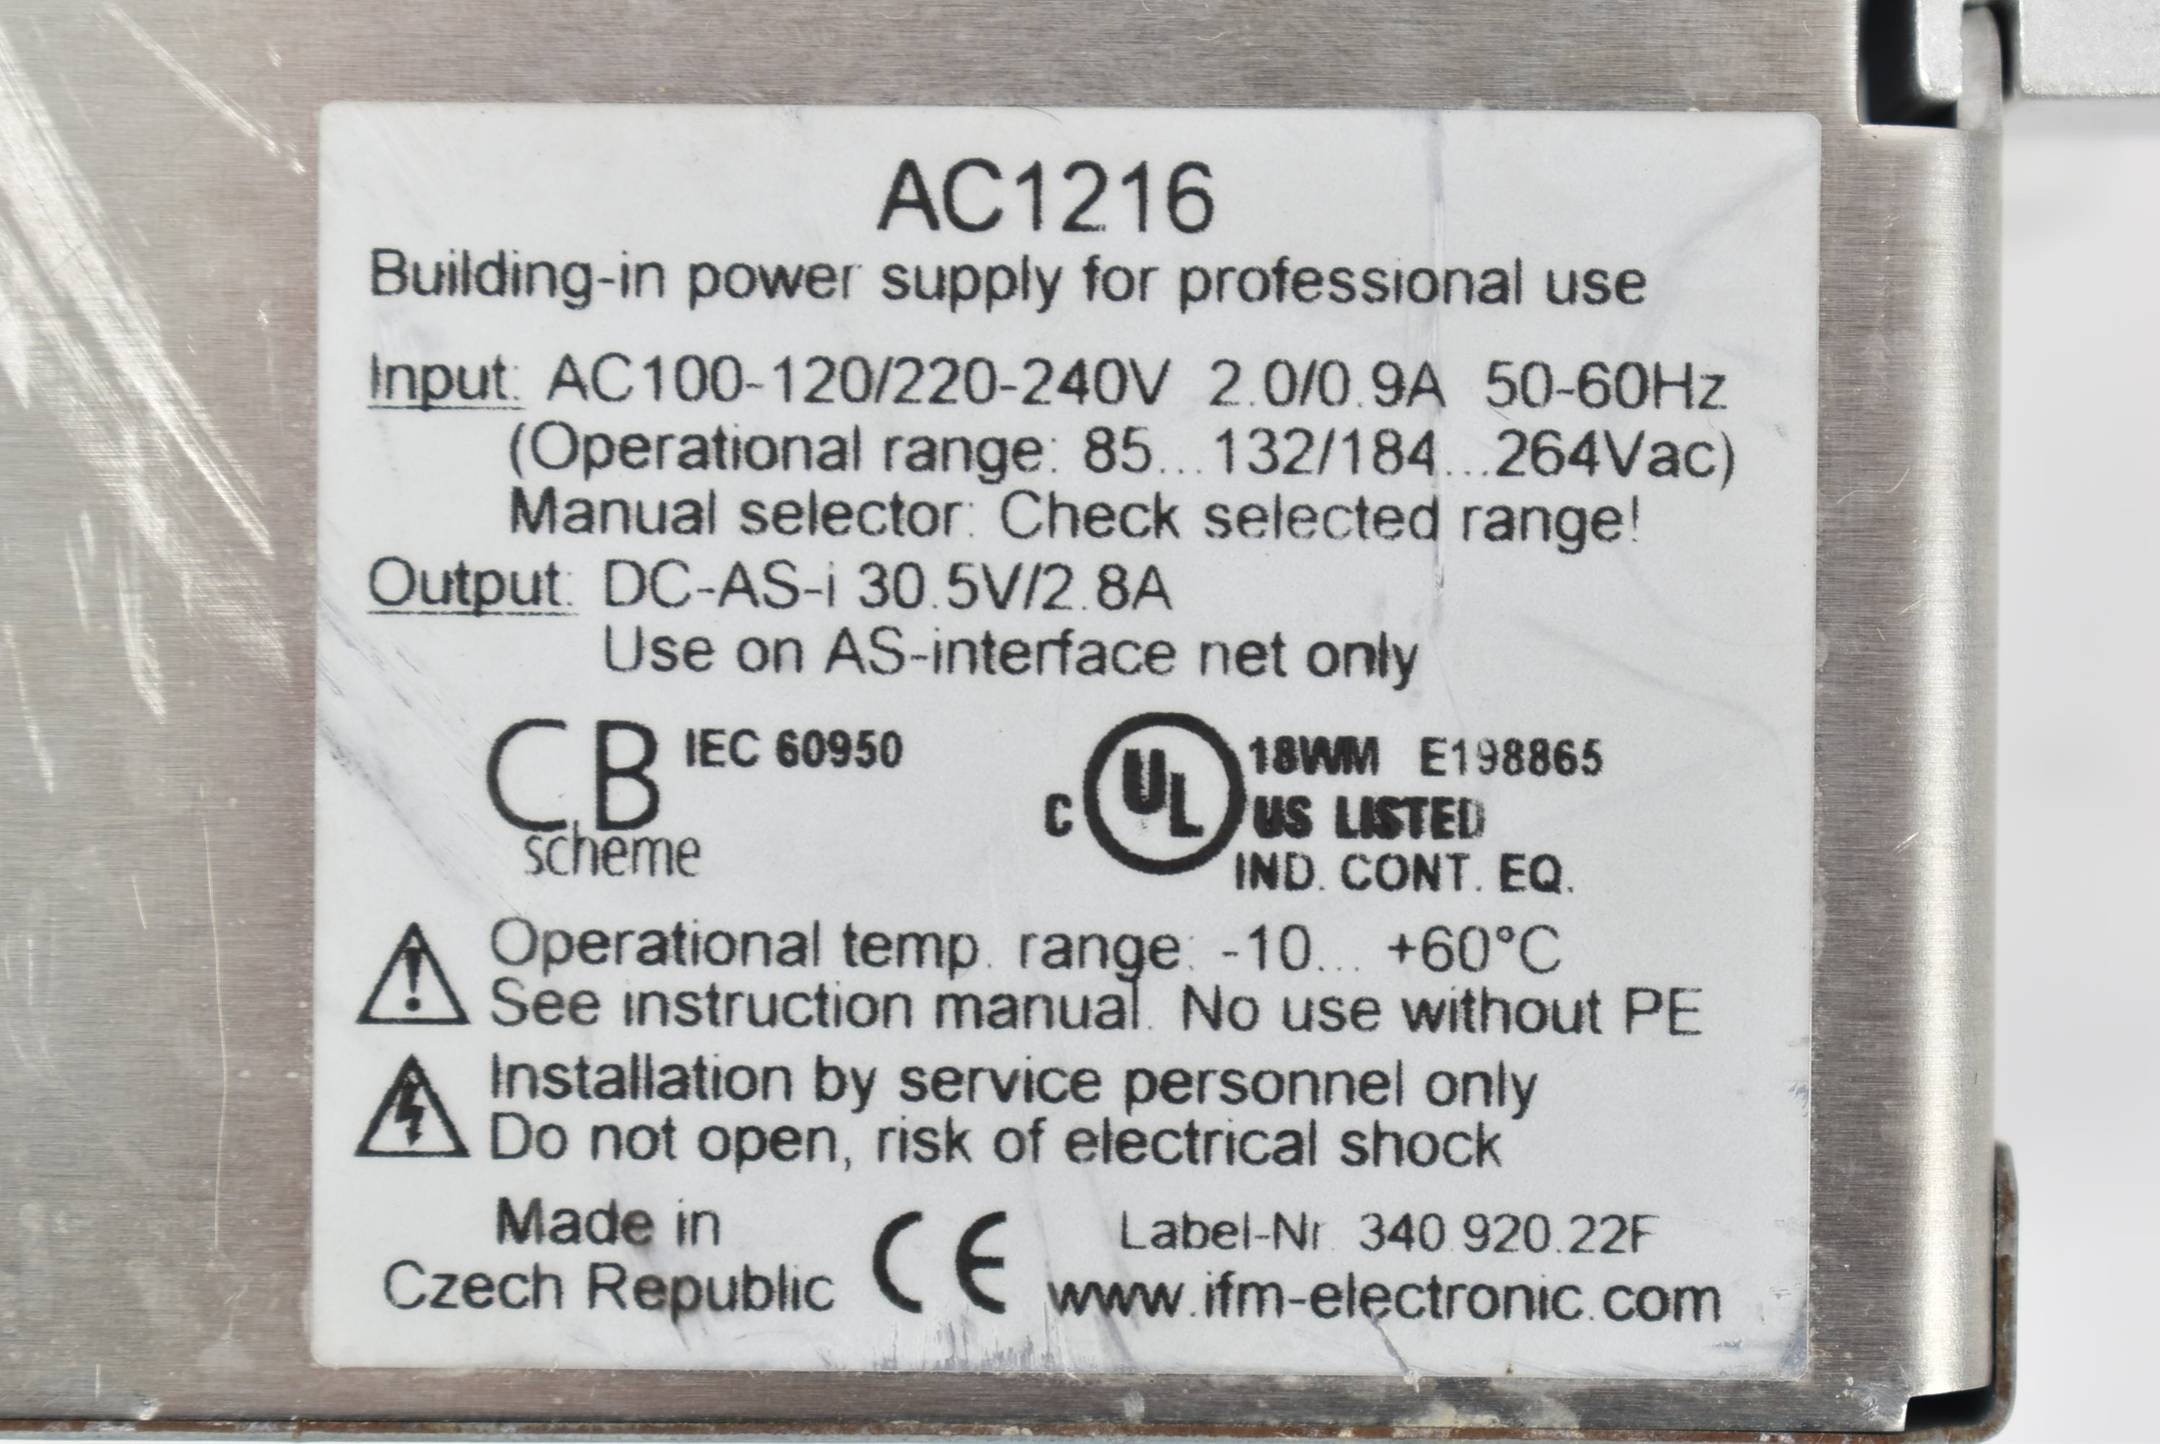 IFM electronic AS-i 2,8A interface Stromversorgung AC 1216 ( AC1216 )